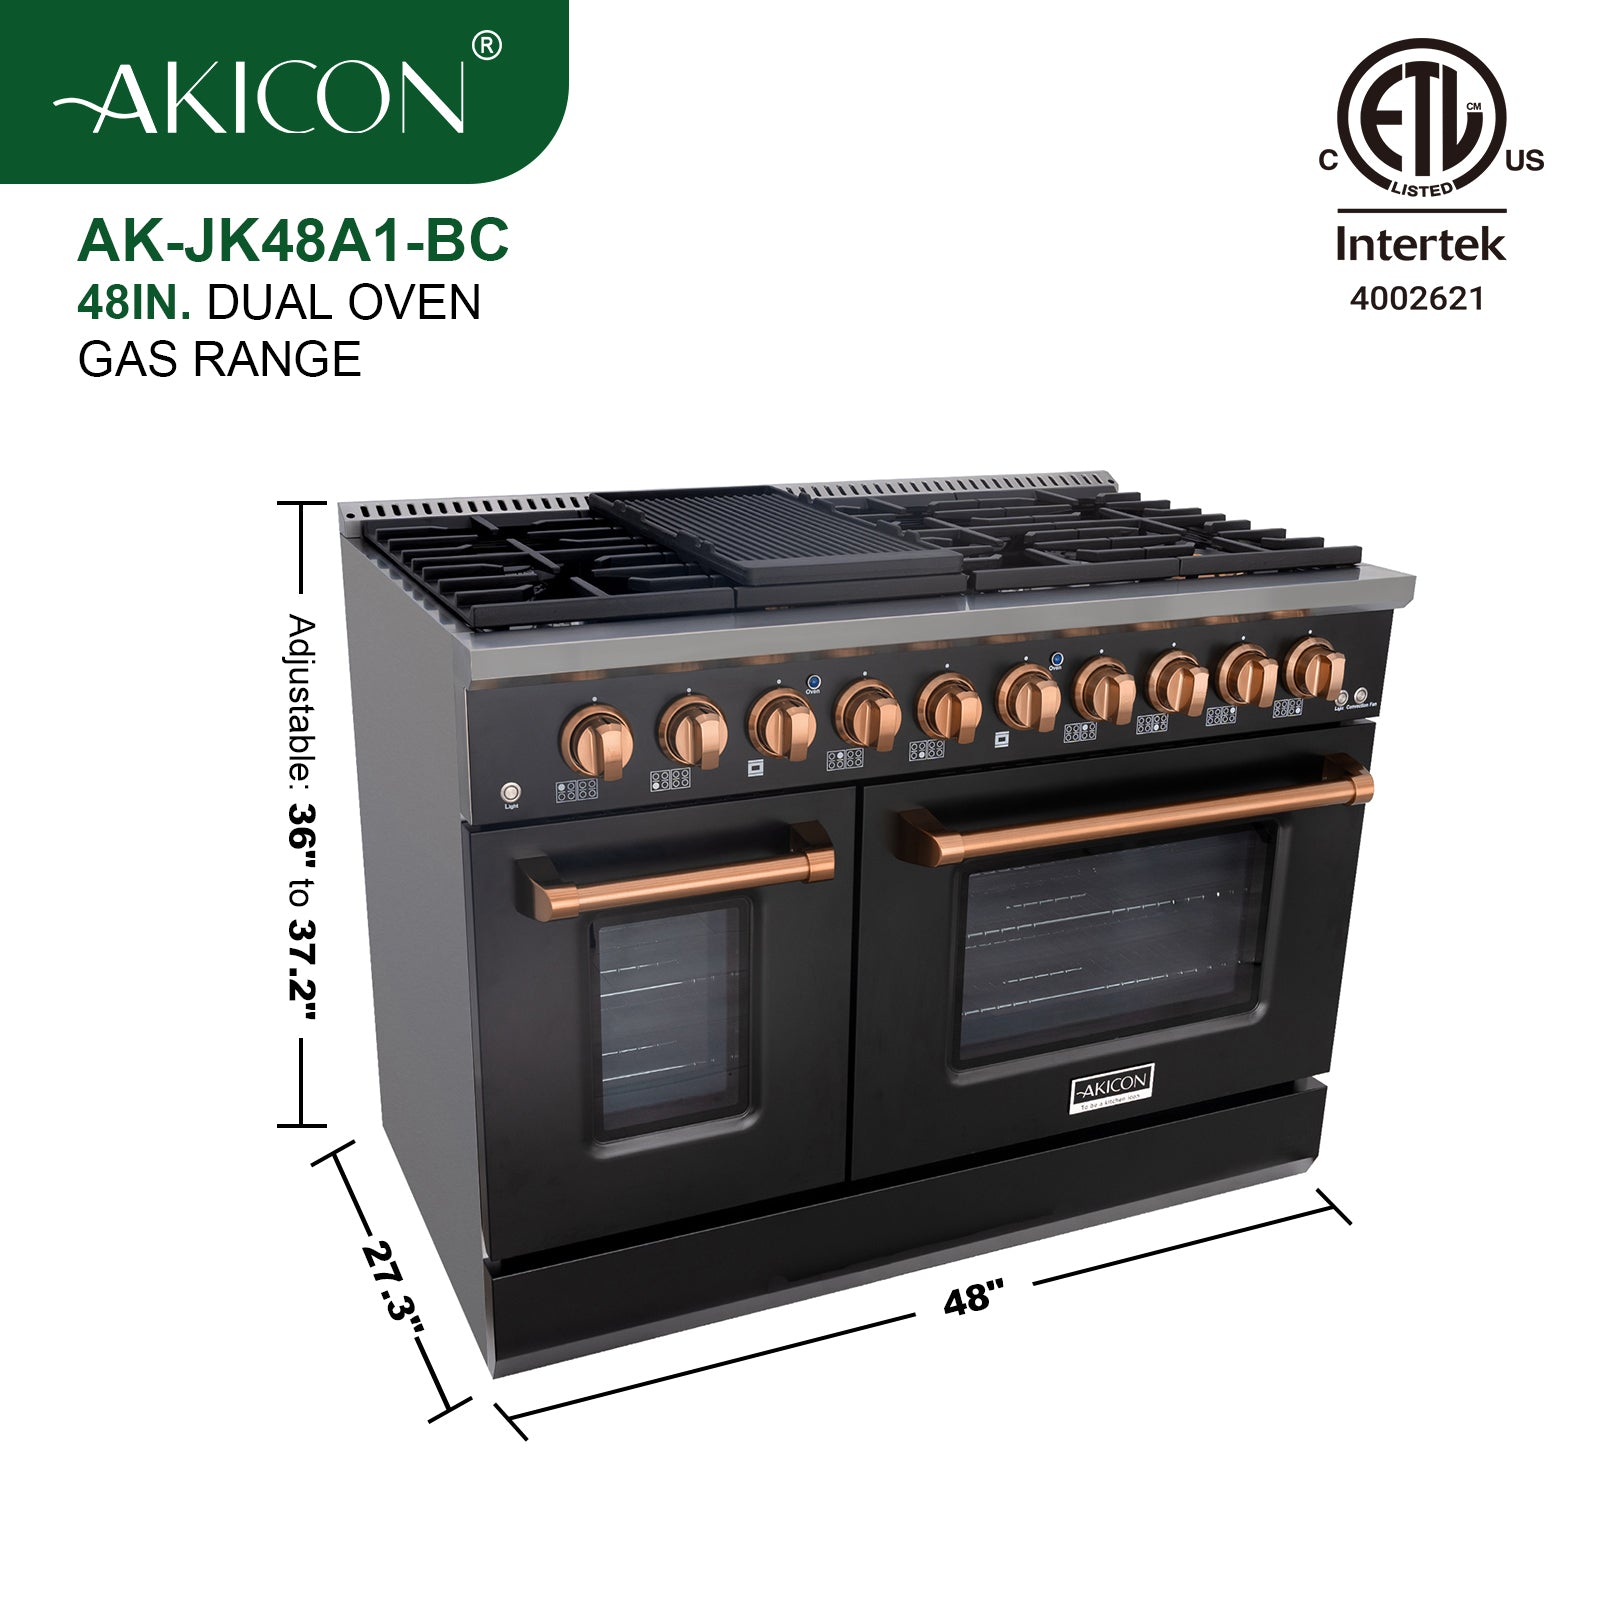 Akicon 48" Slide-in Freestanding Professional Style Gas Range with 6.7 Cu. Ft. Oven, 8 Burners, Convection Fan, Cast Iron Grates. Black & Copper for Janice